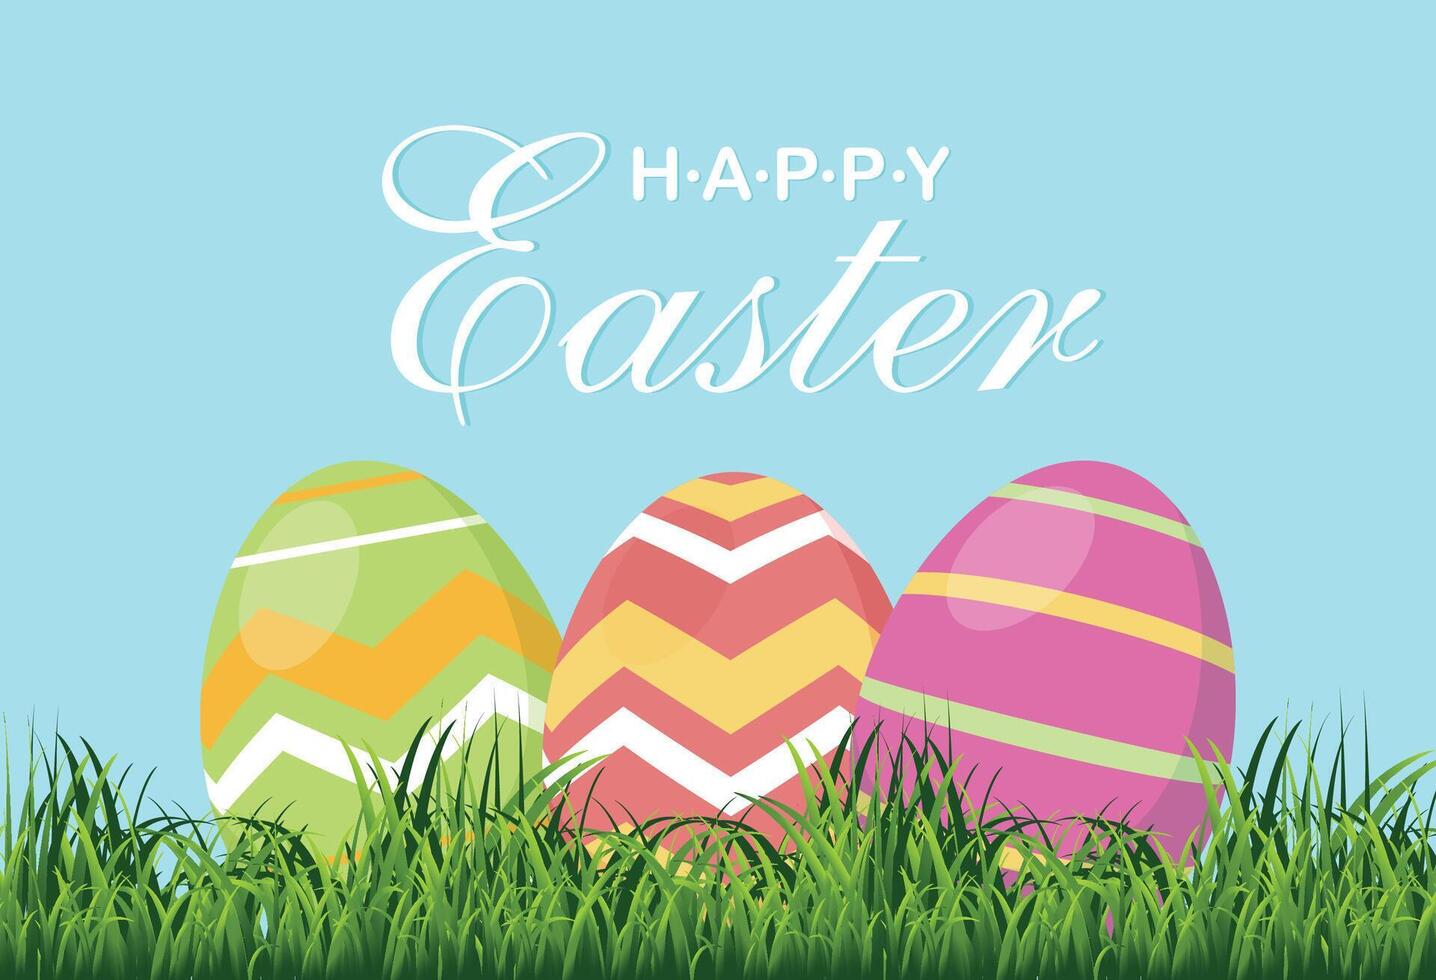 Happy Easter. Easter eggs on green grass. Vector graphics